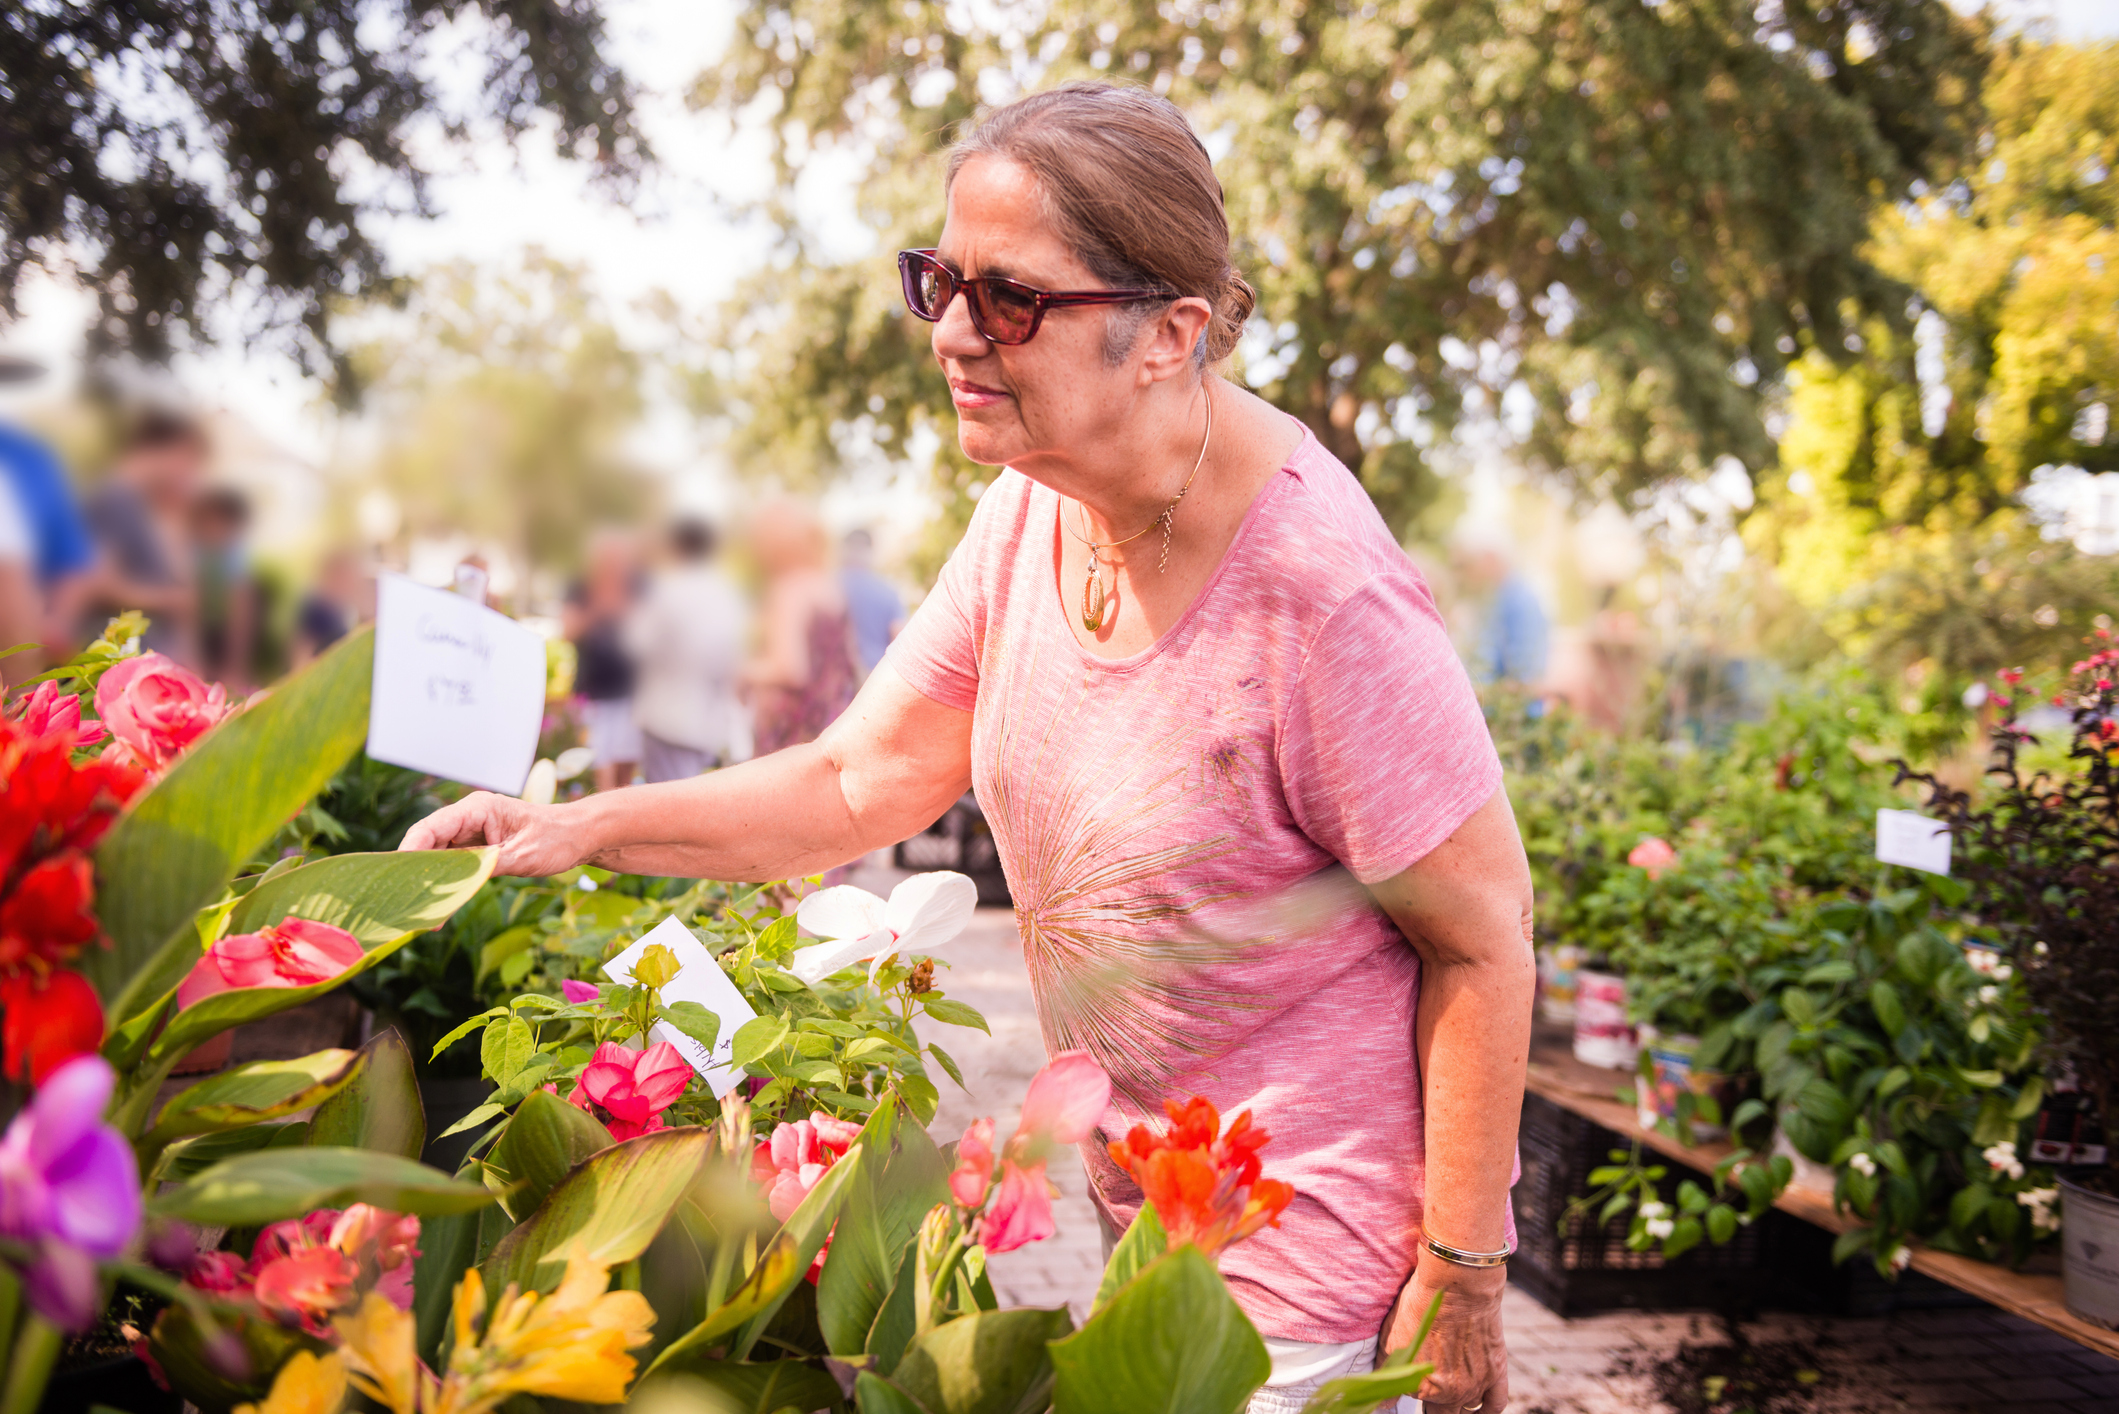 A senior aged Puerto Rican woman admires colorful flowers for sale at the weekend farmers market in Winter Park, Florida.